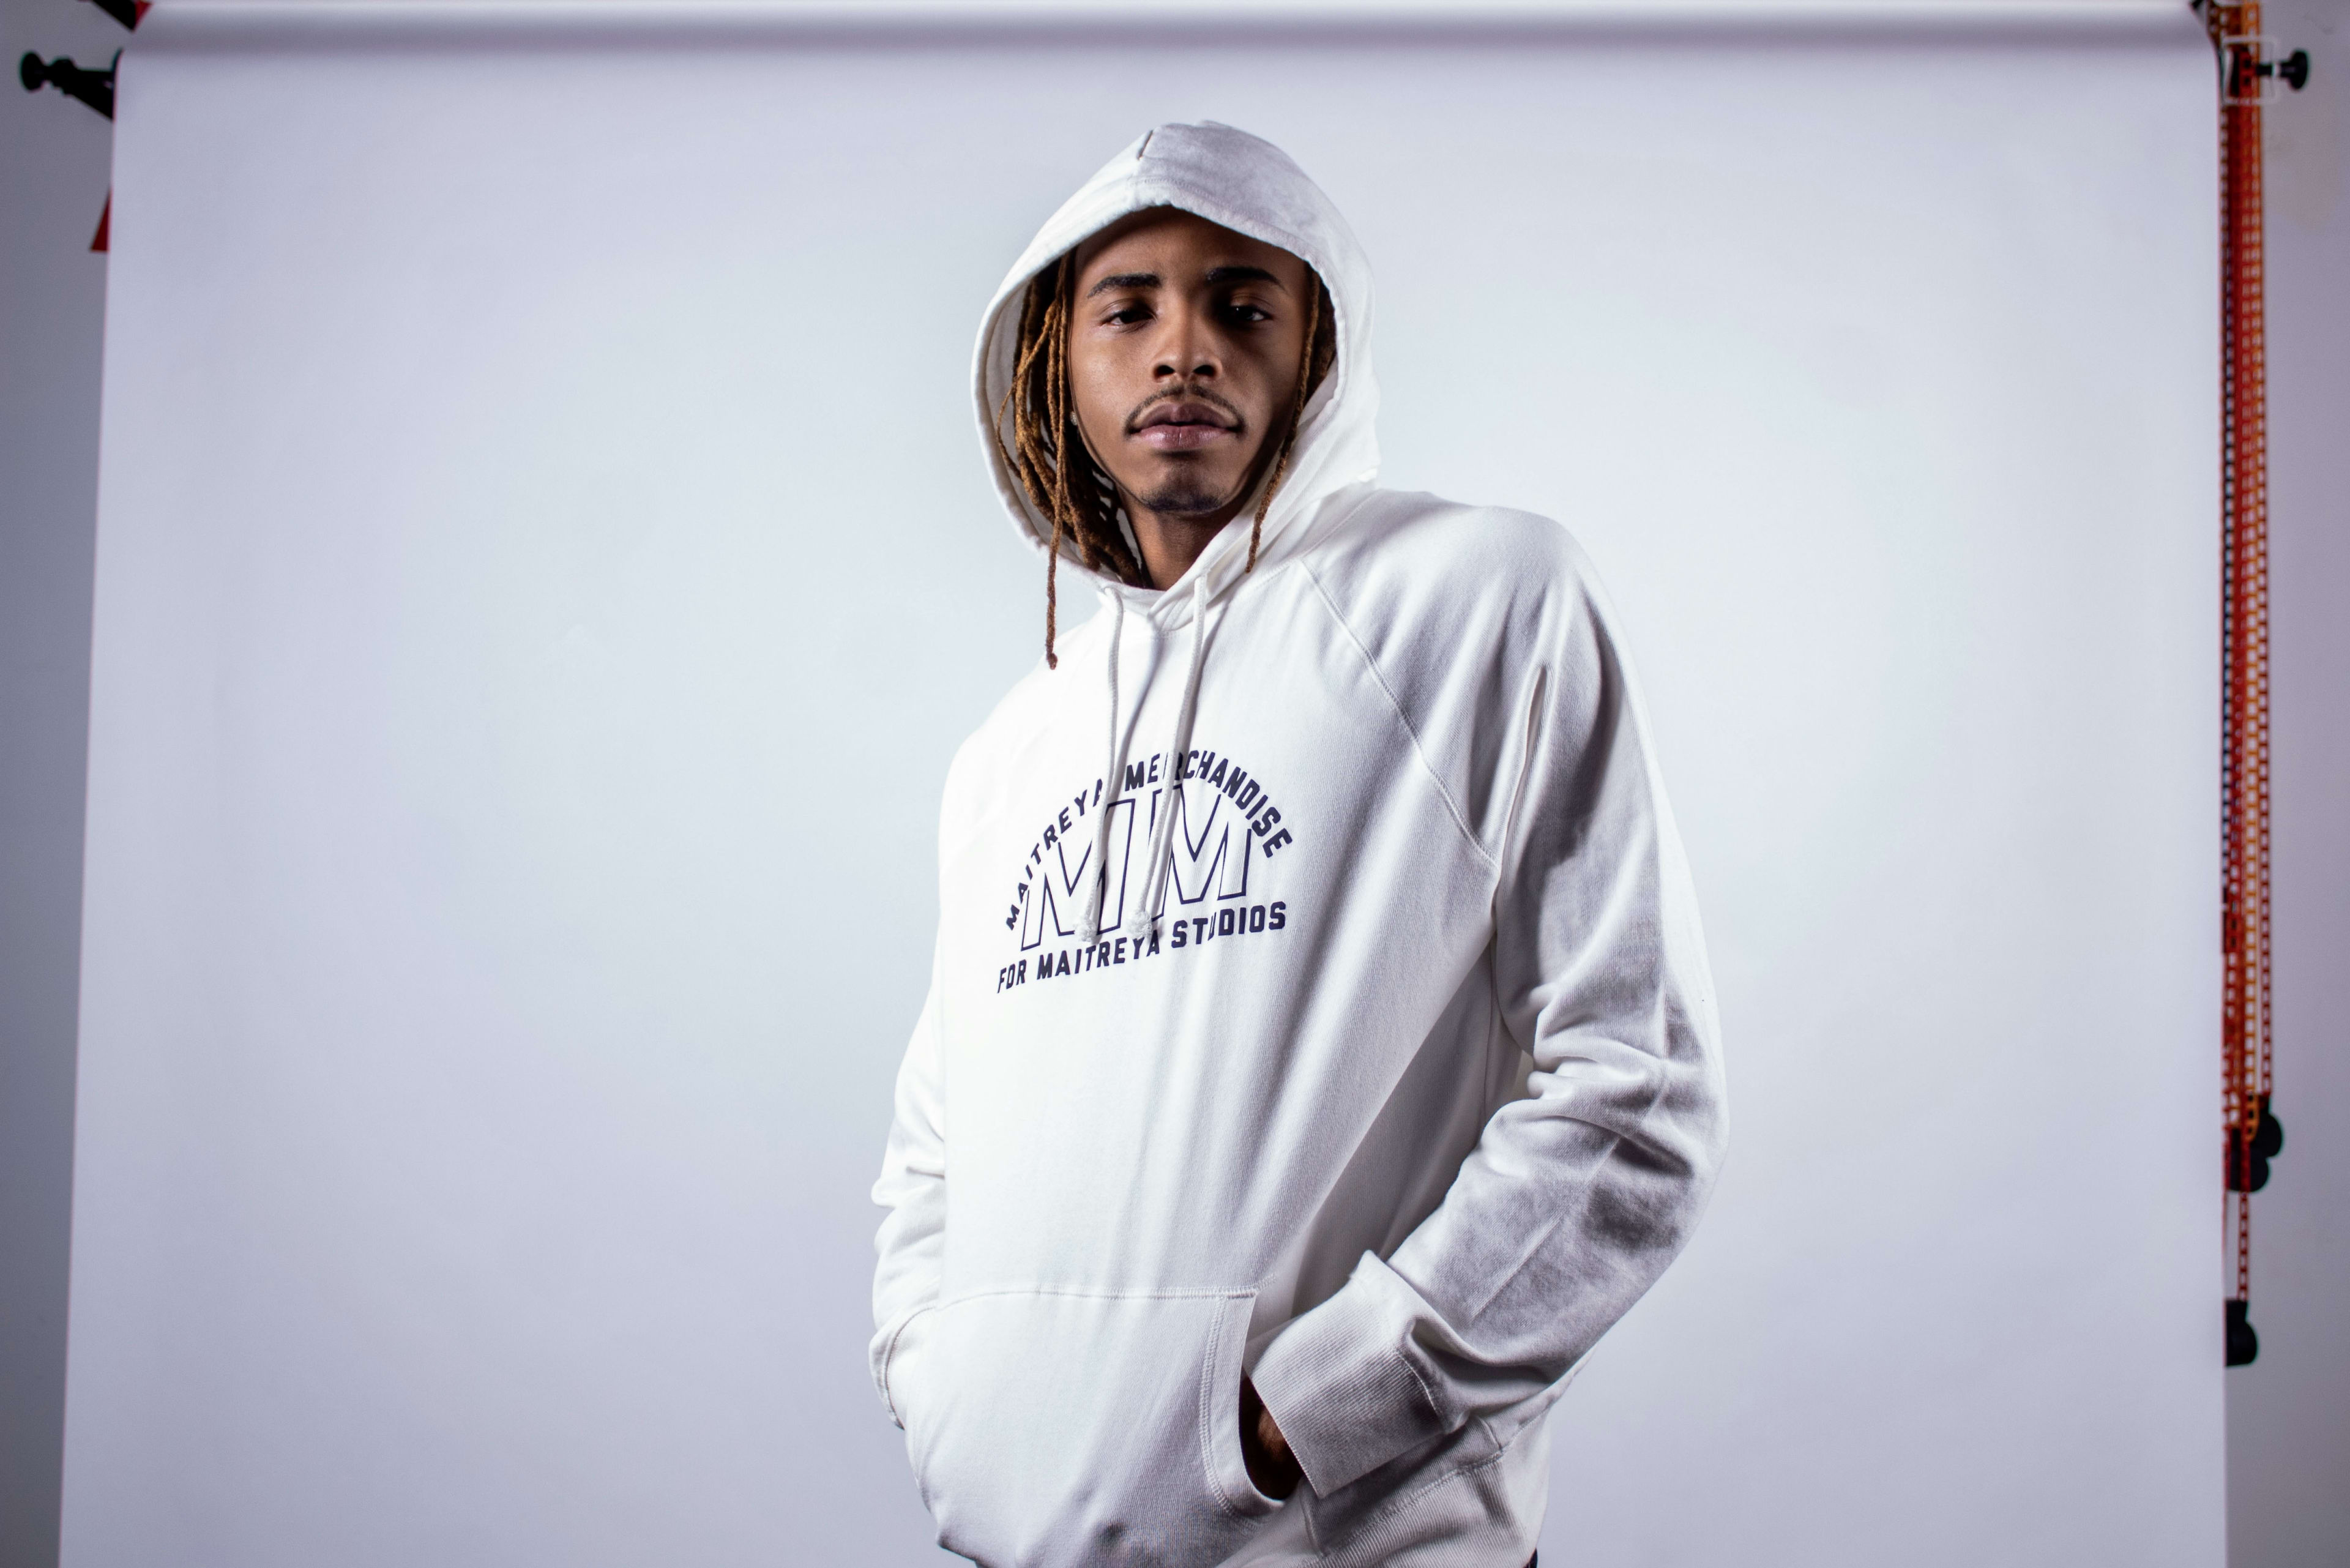 A man in a white hoodie during a photo shoot.